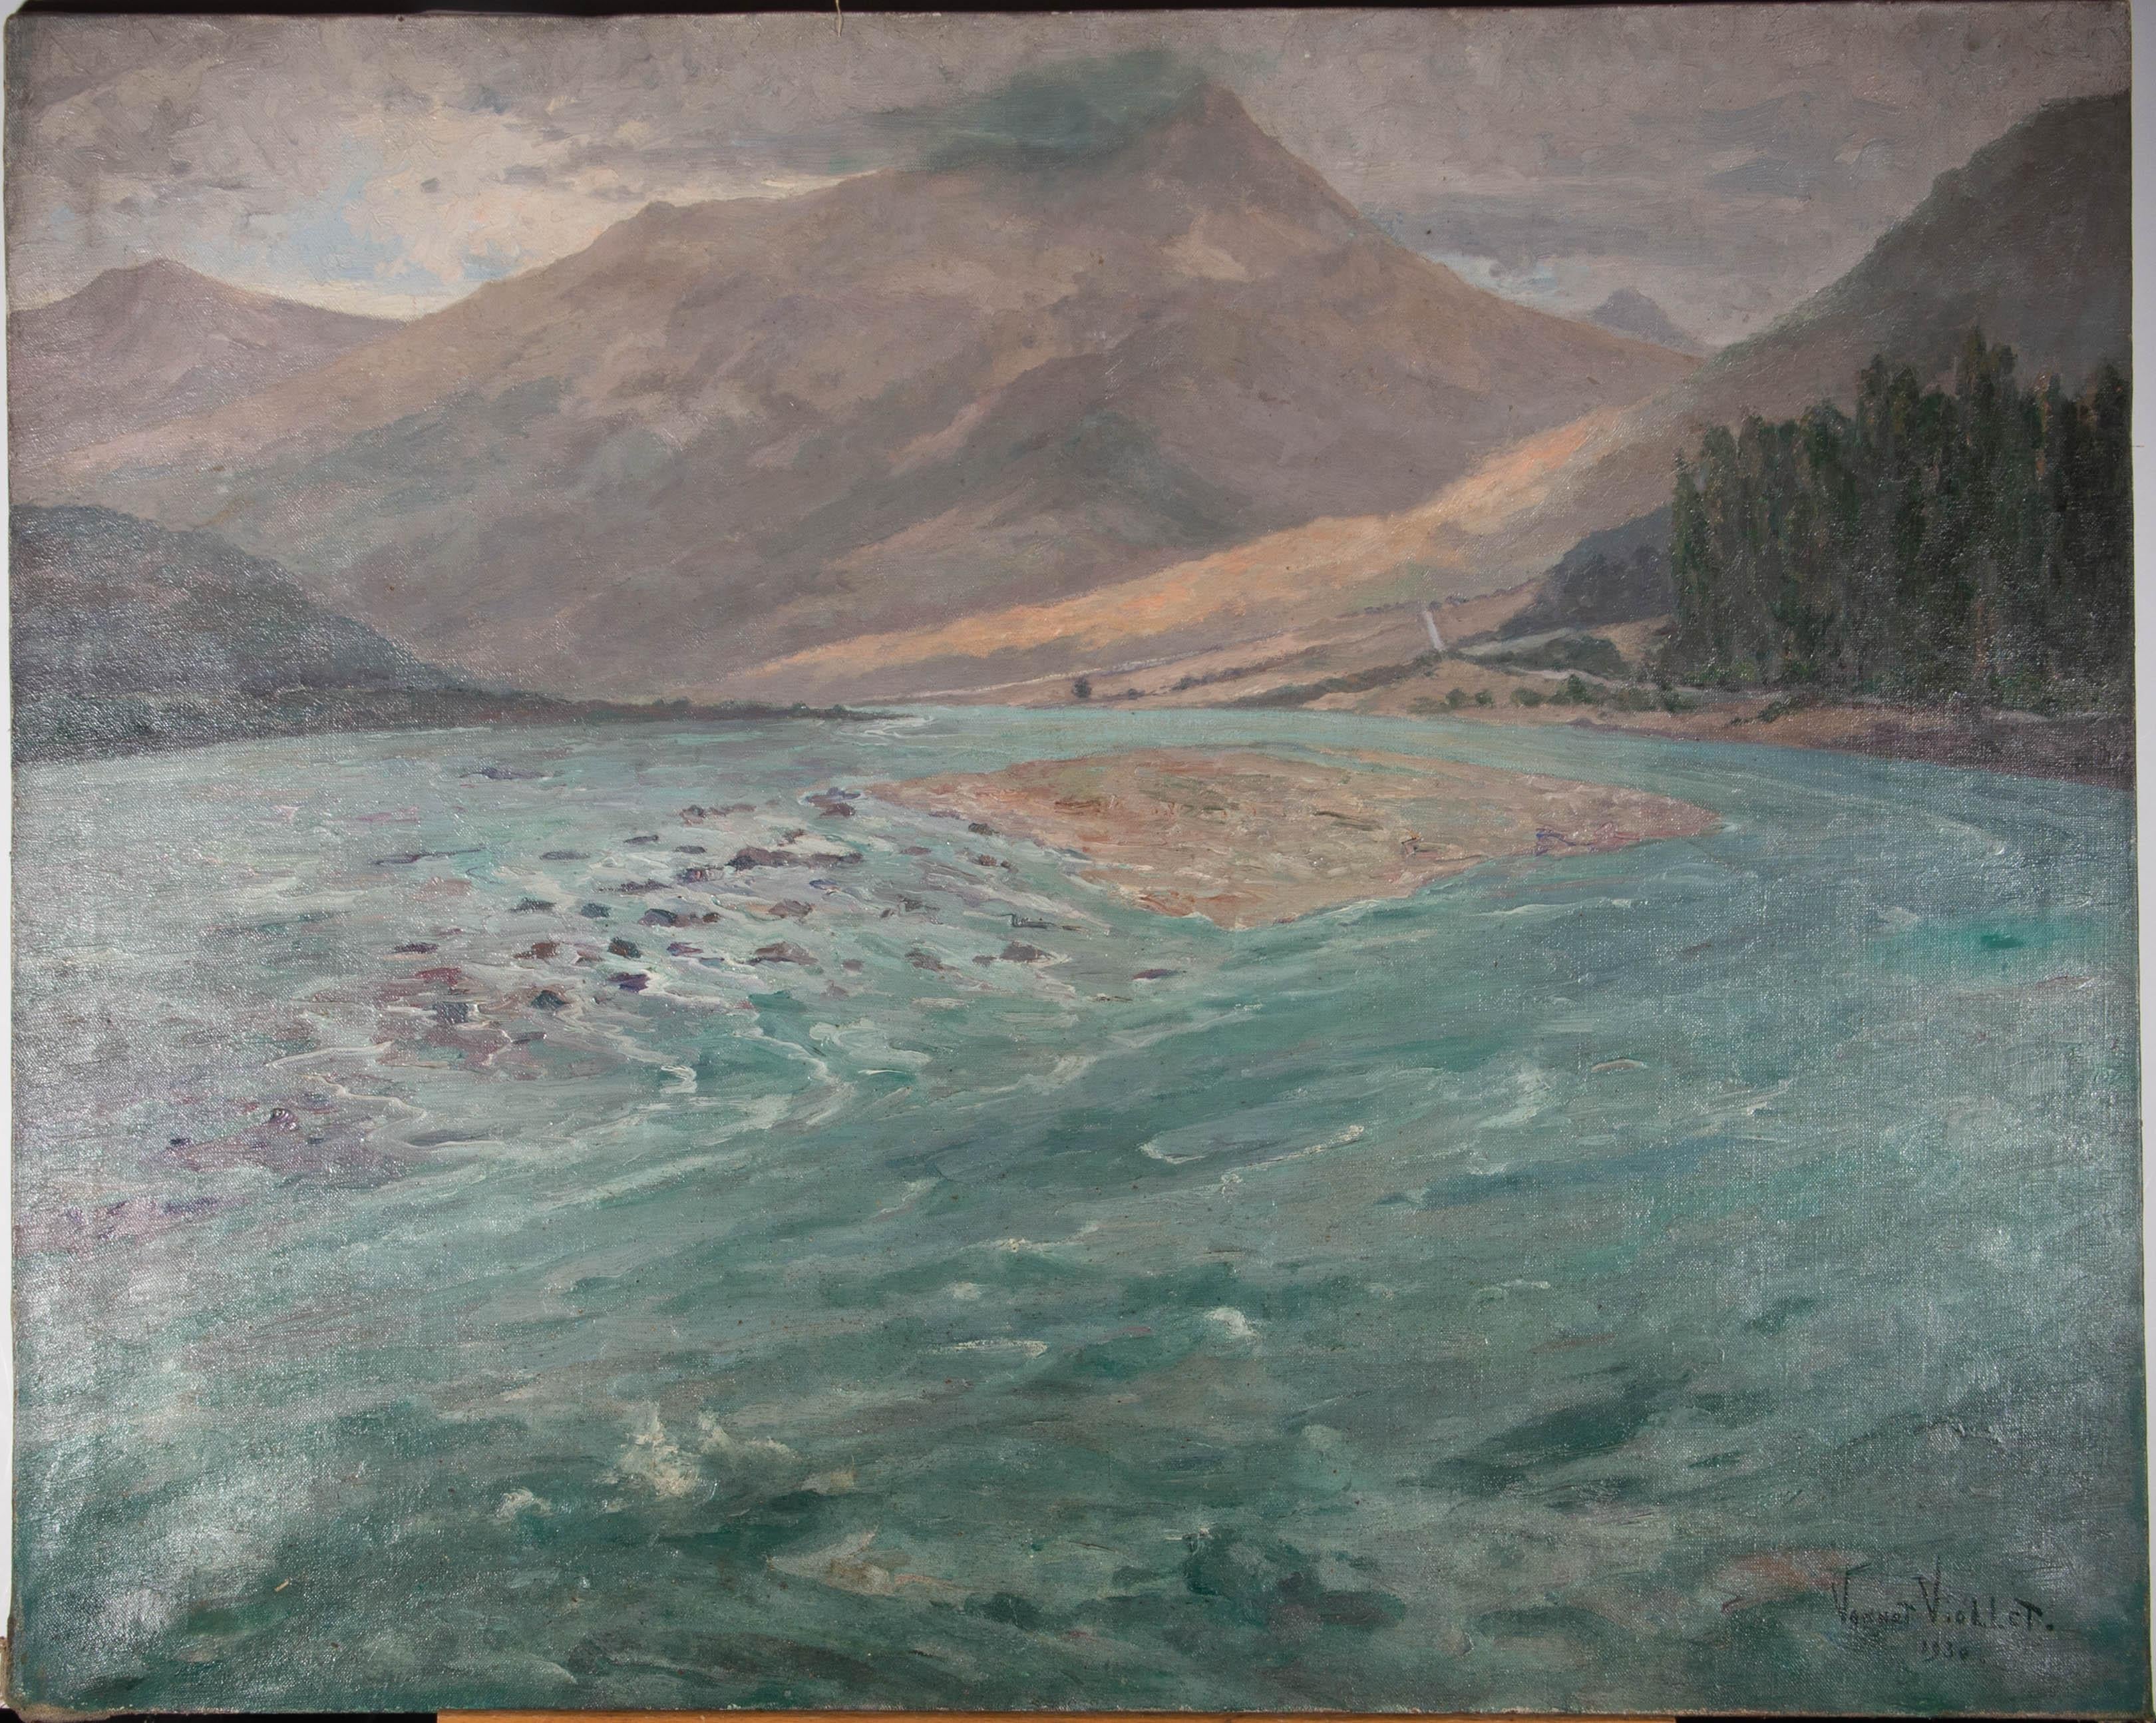 A striking panoramic view of the meandering River Durance as it winds its way through the Southern Alpine Parpaillon mountain pass. The artist has signed and dated to the lower right corner. The painting is on canvas over stretchers and the artist